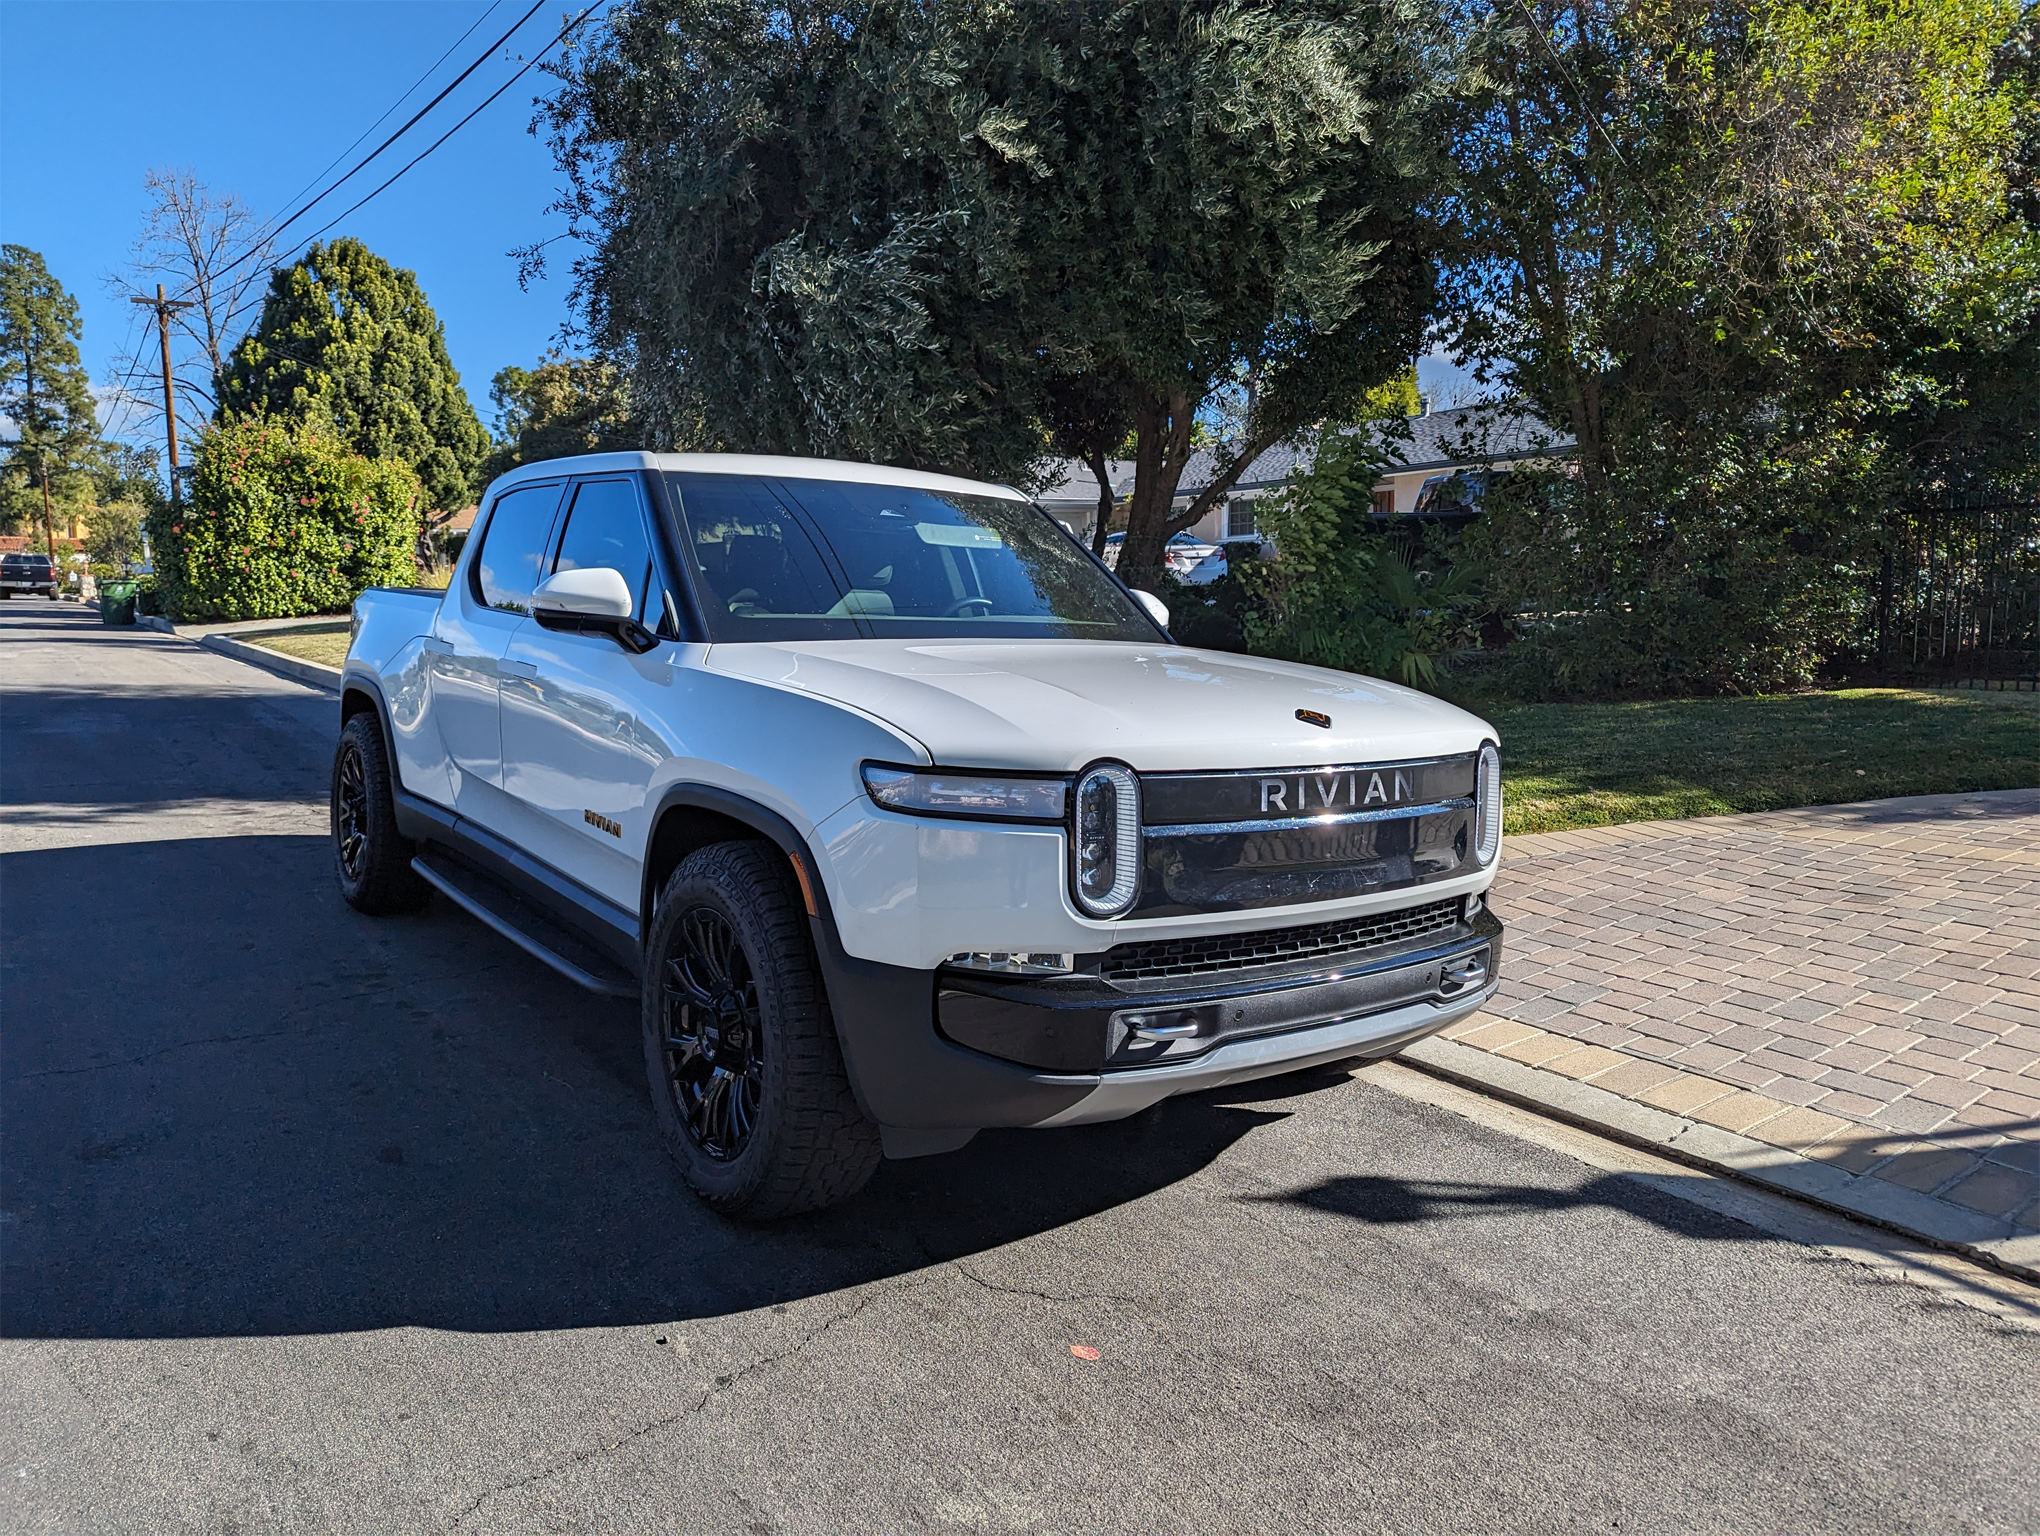 Rivian R1T R1S UPDATE: Blackout lightbar decal added + applied vinyl to break up the controversial front end on my Rivian 1704652990797-